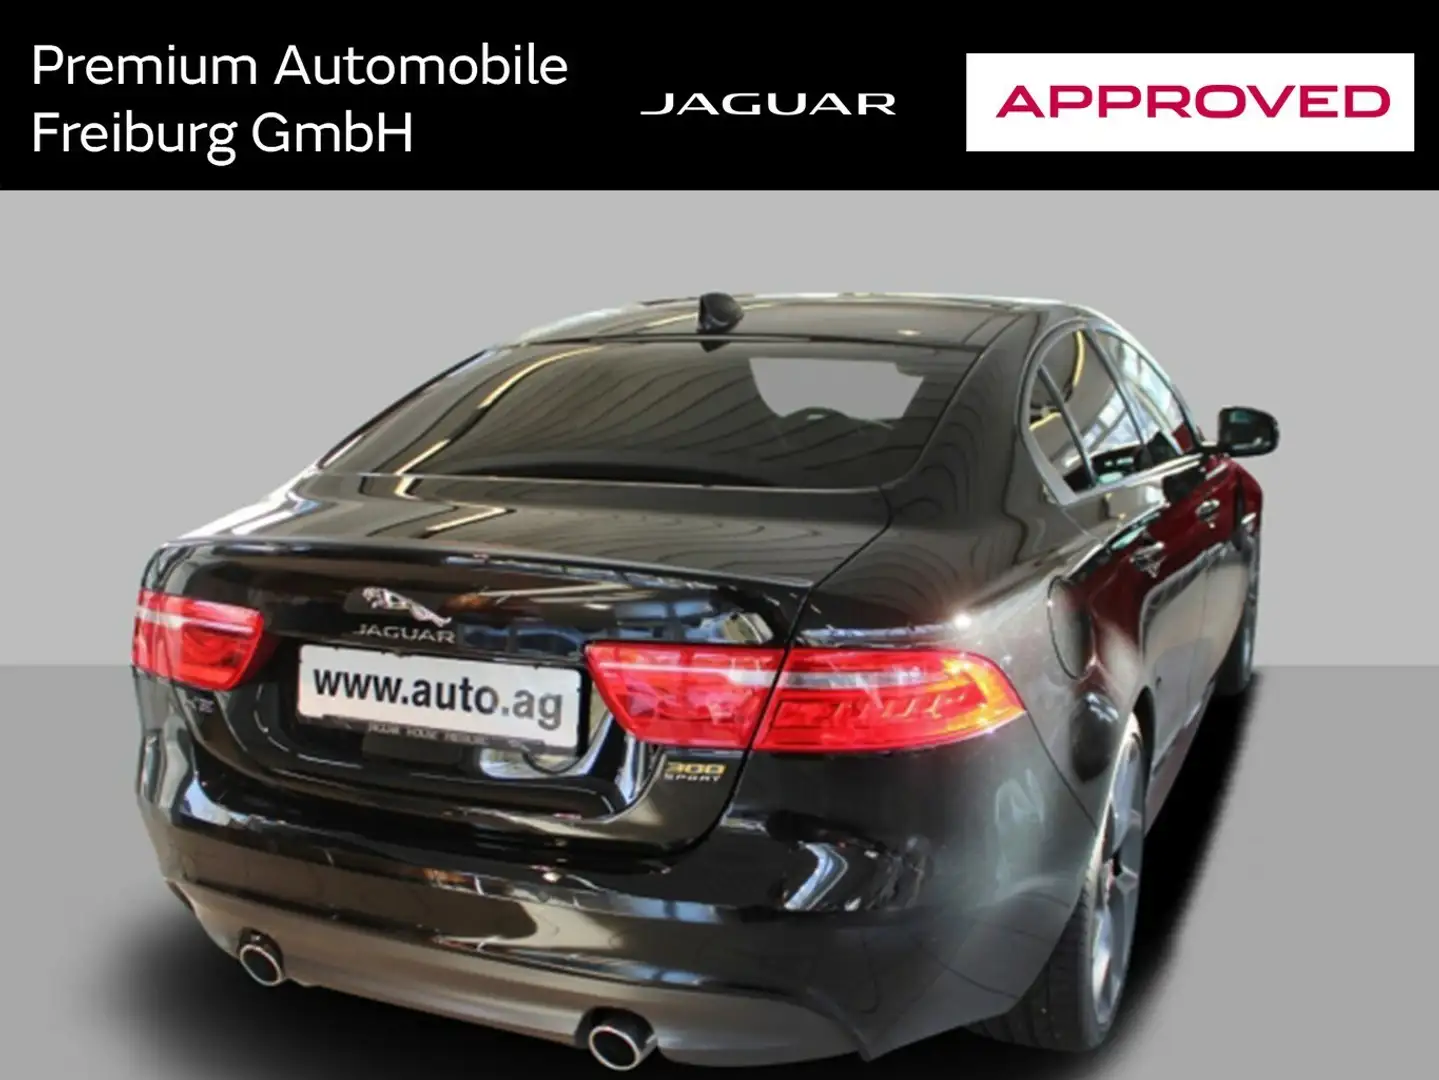 Jaguar XE 300 SPORT AWD MY19 APPROVED crna - 2